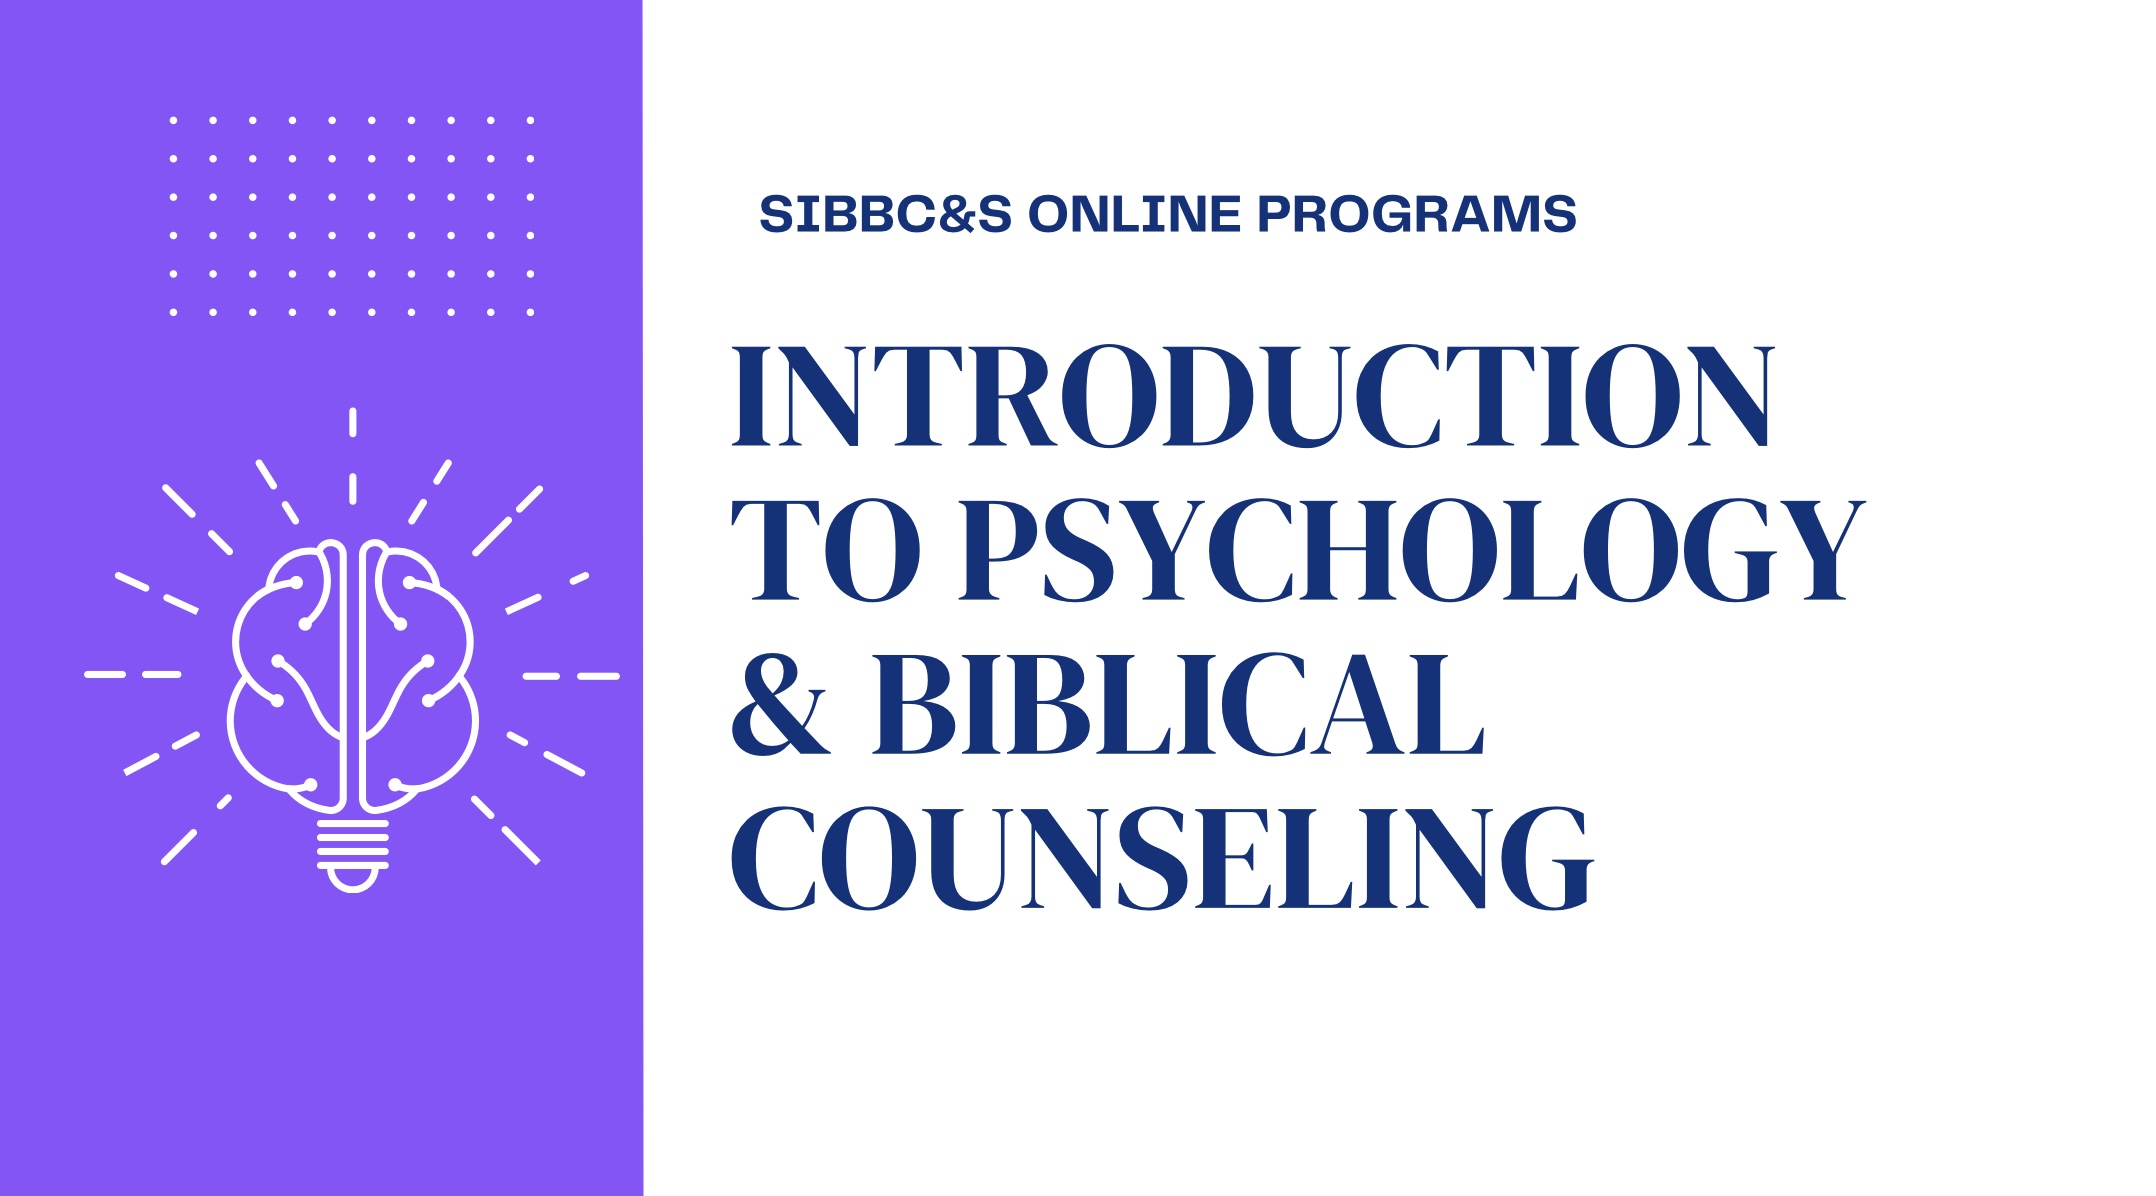 Introduction to Psychology & Biblical Counseling